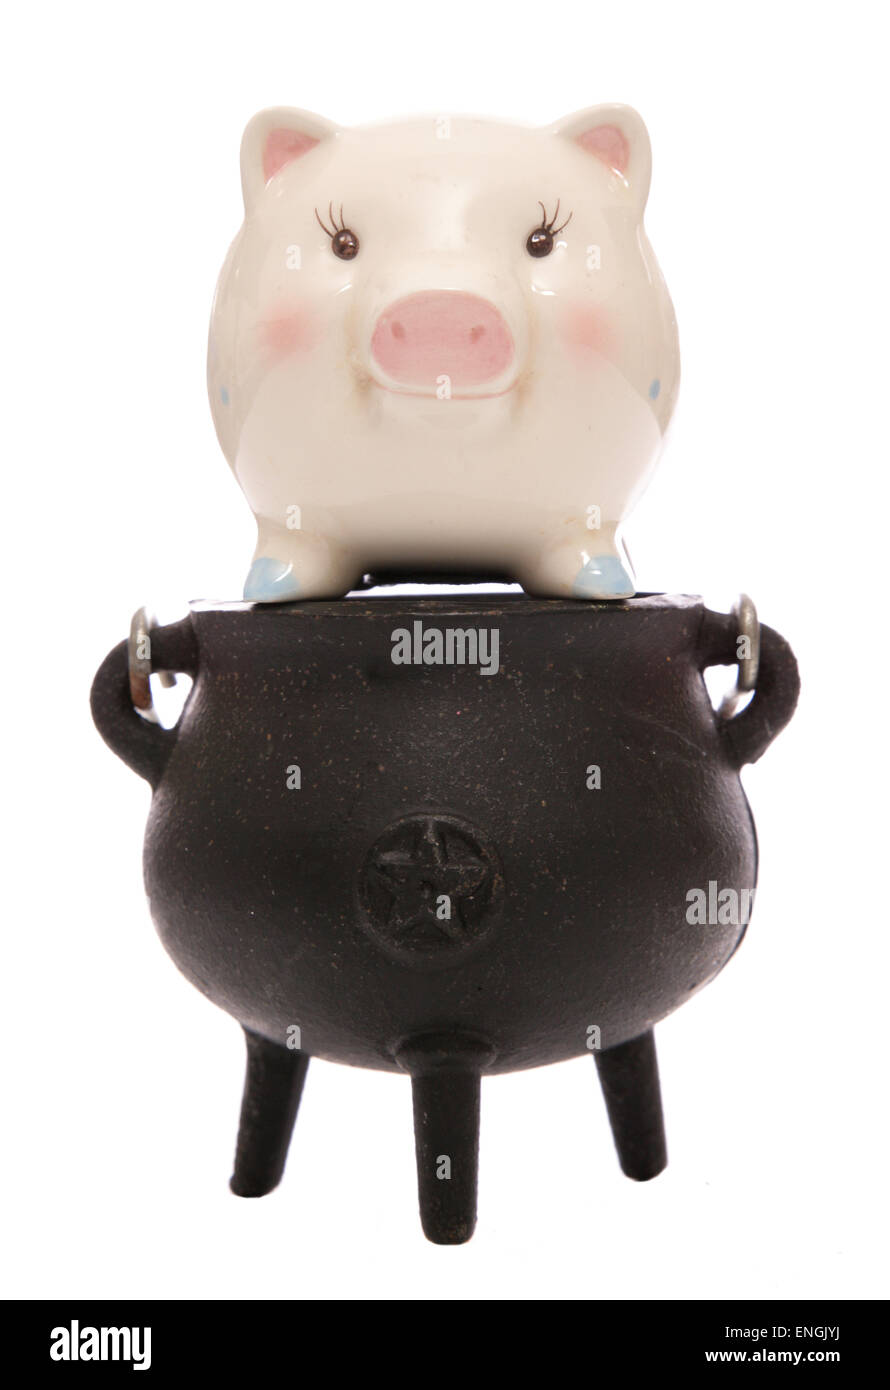 cooking the books piggy bank cutout Stock Photo